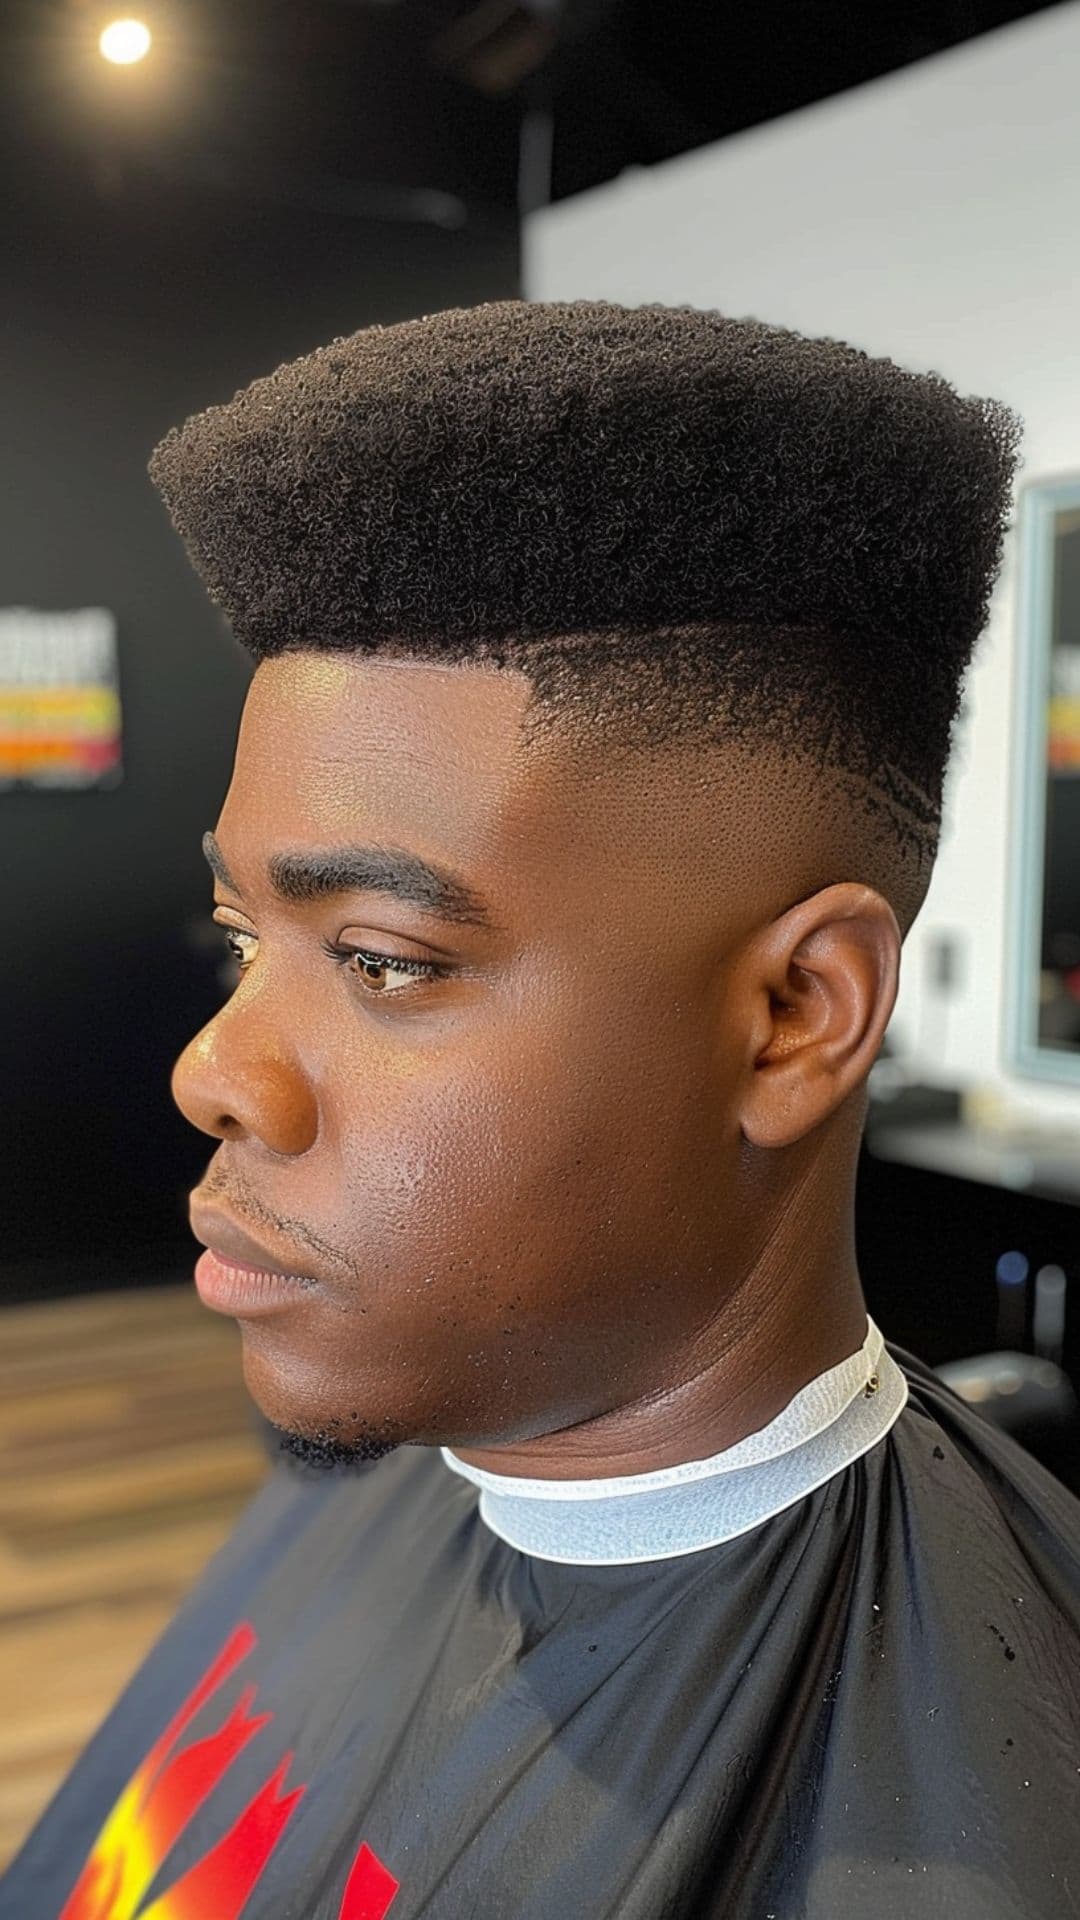 A black man modelling a high top fade hairstyle.